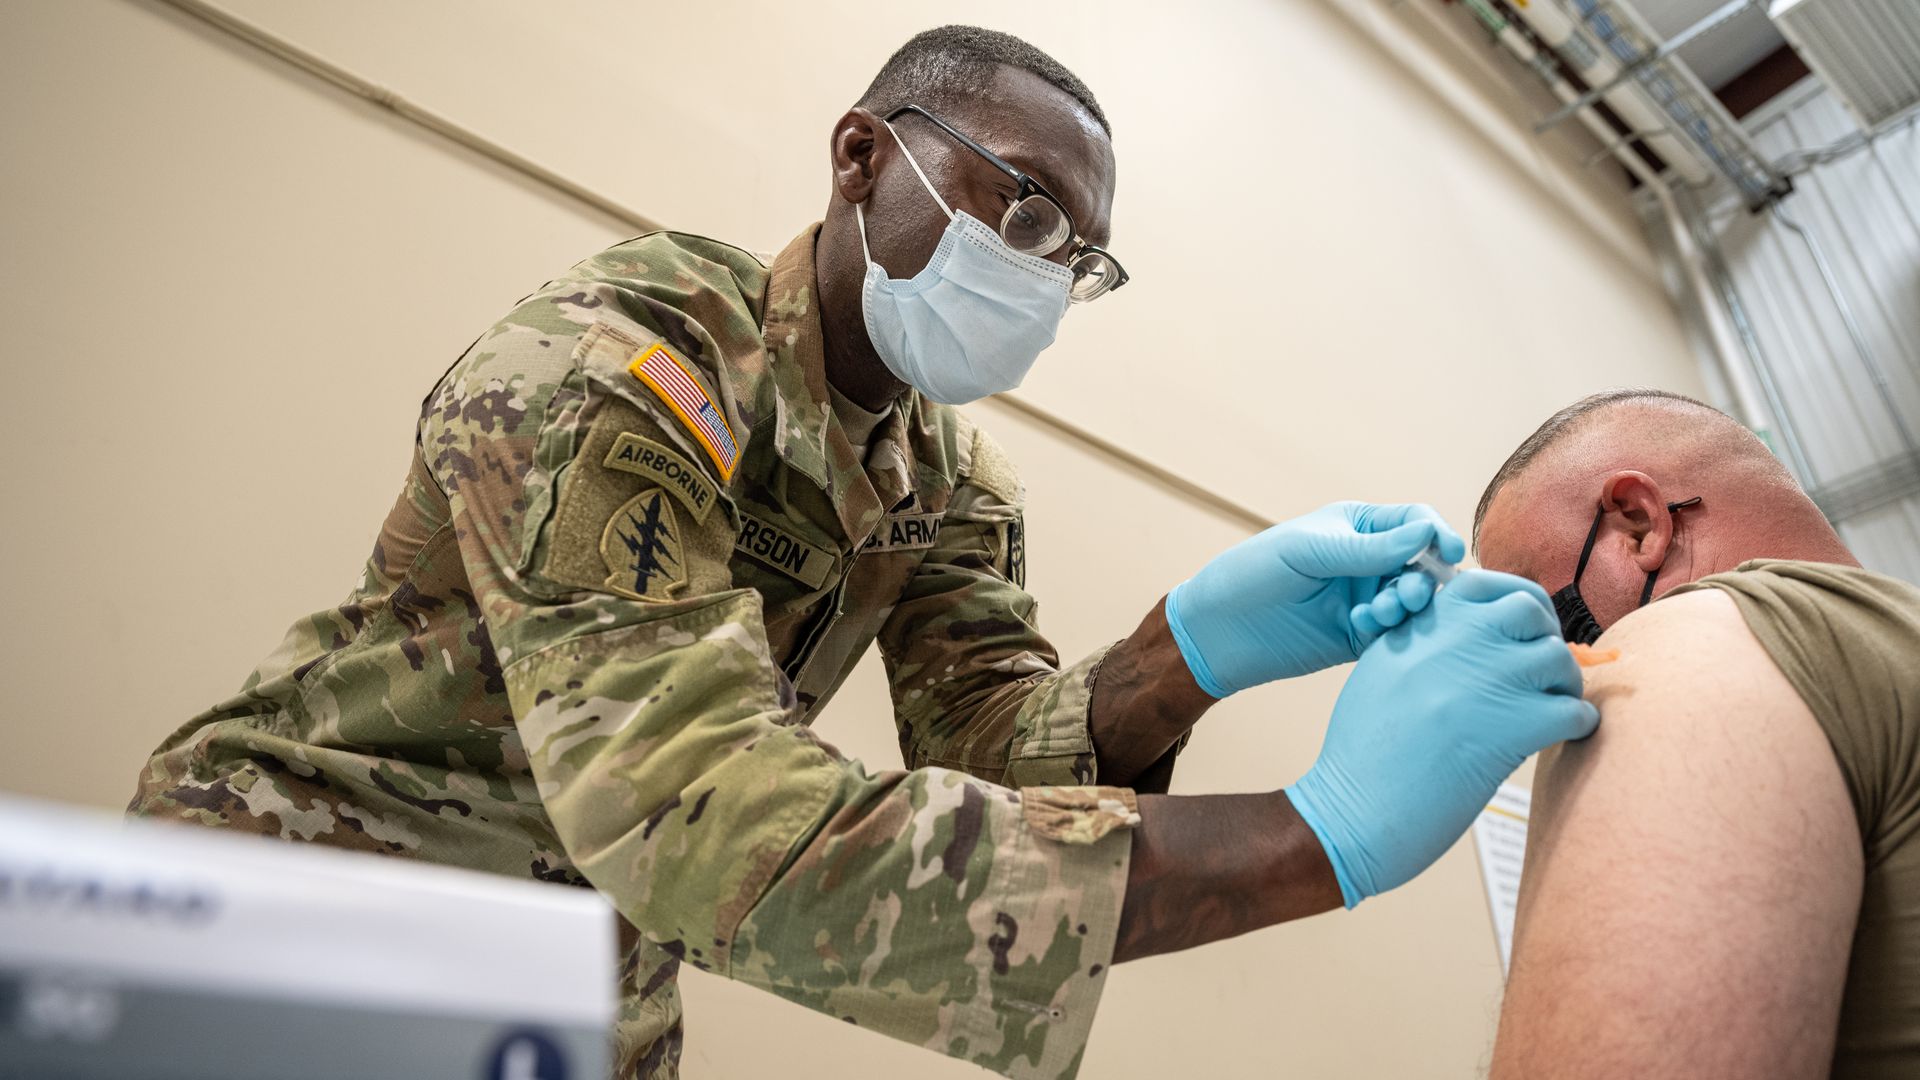 Preventative Medicine Services NCOIC Sergeant First Class Demetrius Roberson administers a COVID-19 vaccine to a soldier on September 9, 2021 in Fort Knox, Kentucky.